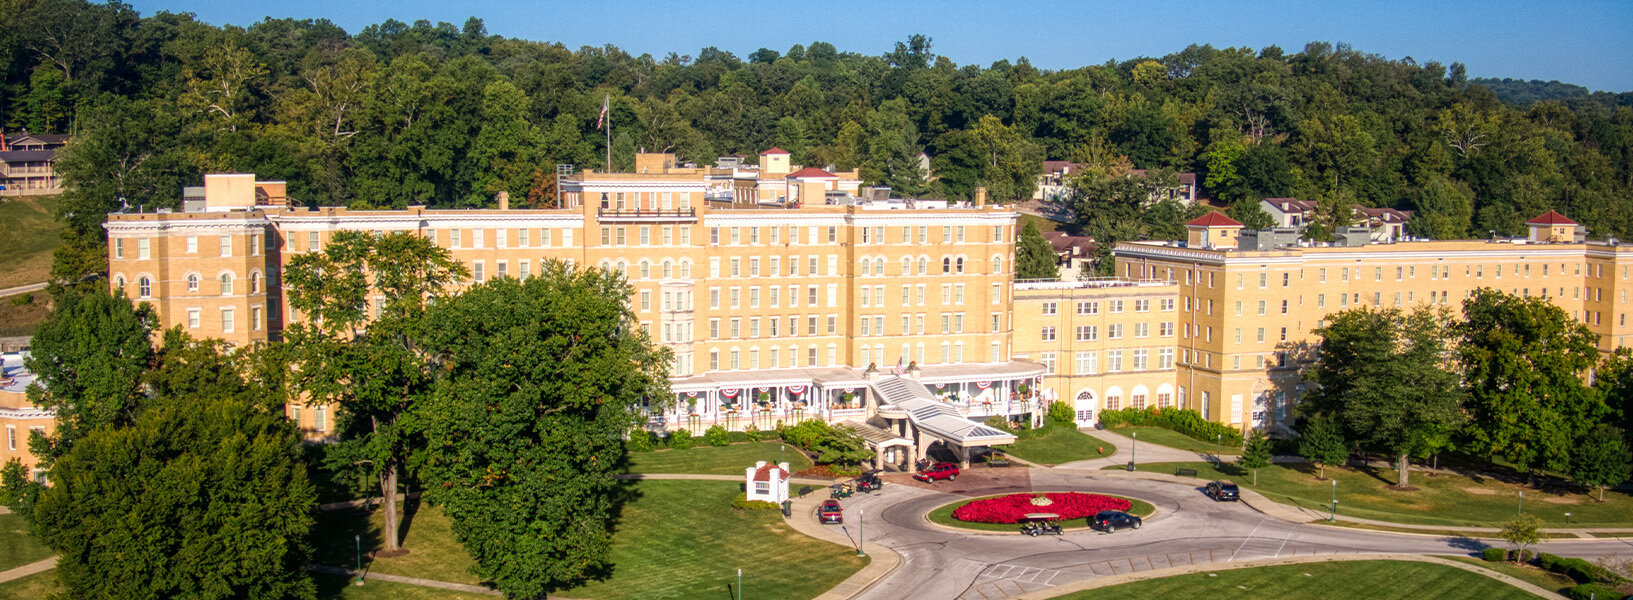 French Lick Springs